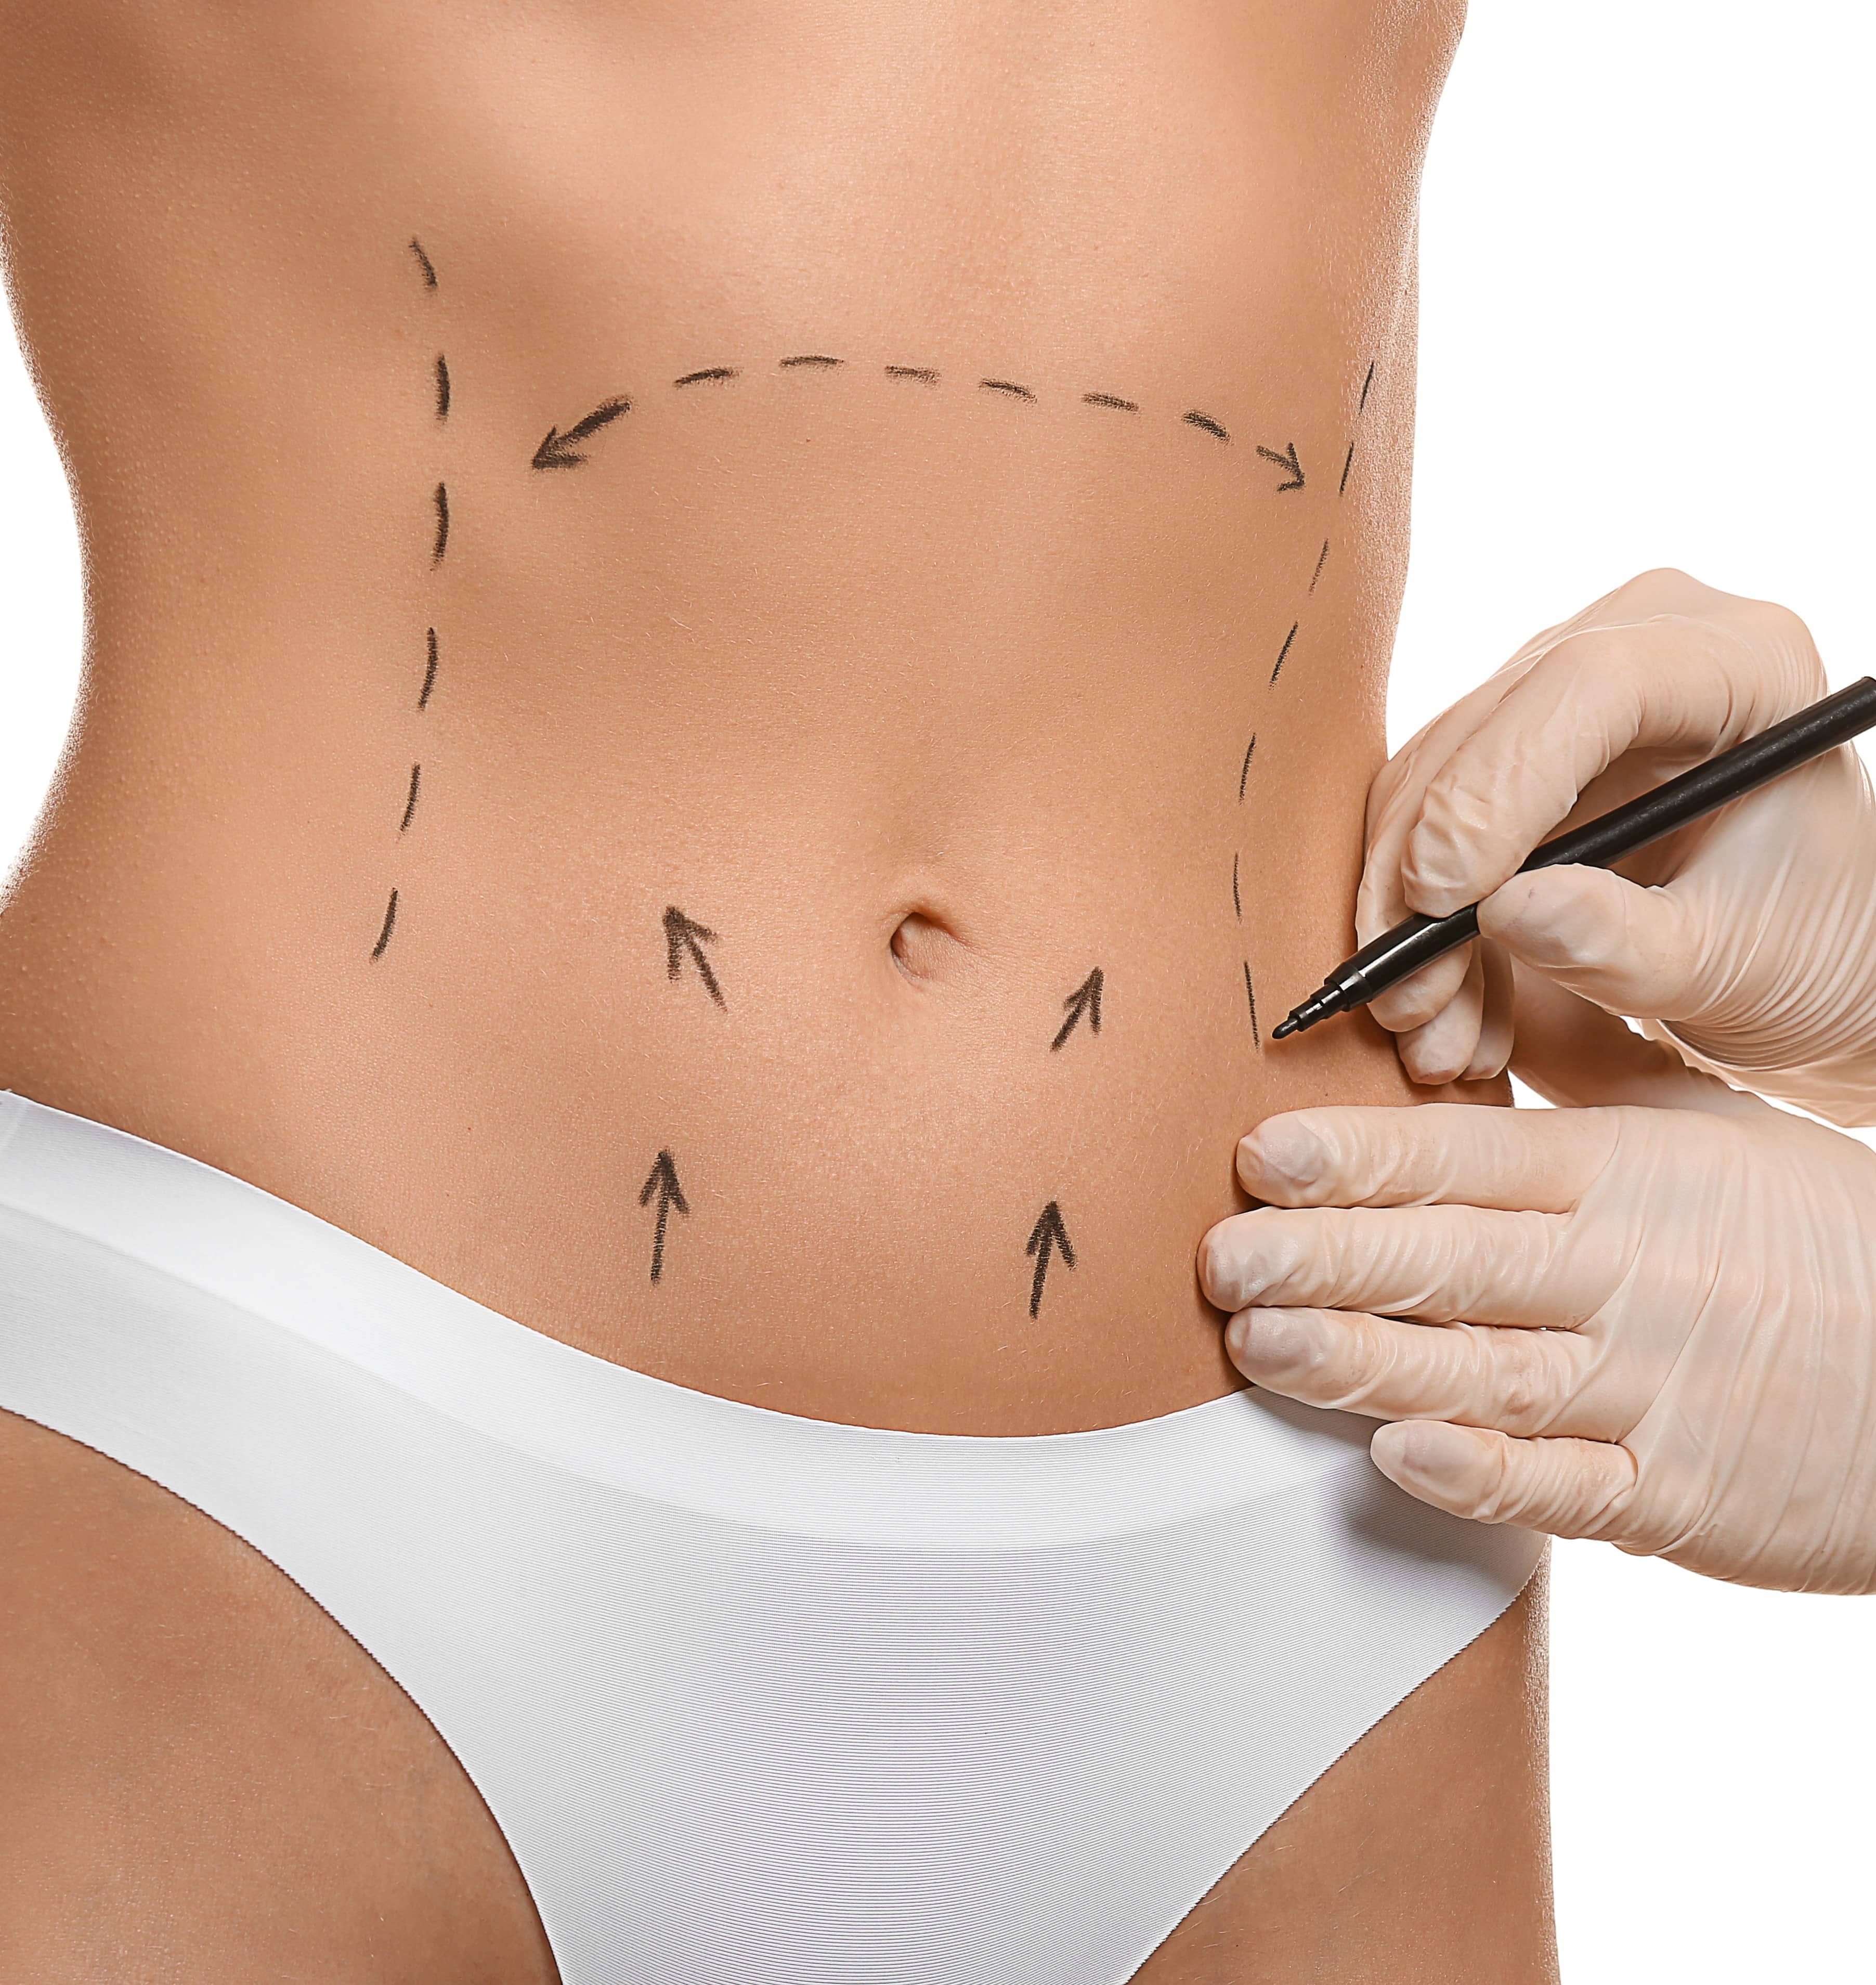 What's the Difference Between Panniculectomy and Tummy Tuck? - CHRISTOPHER  NEWMAN. D.O.